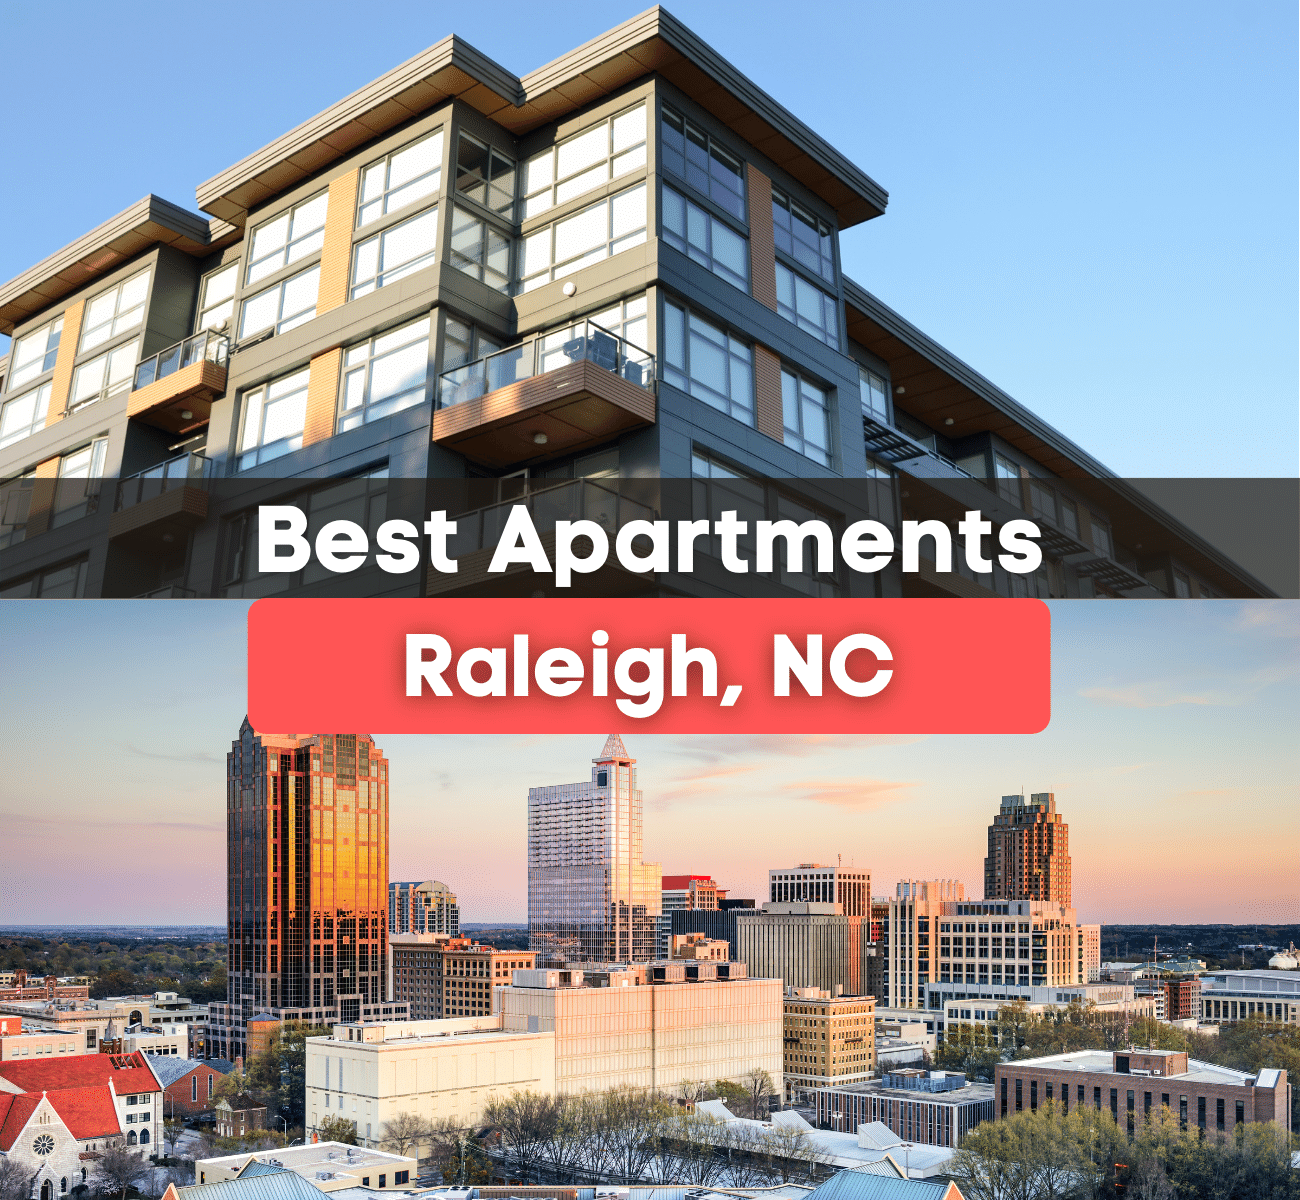 10 Best Apartments in Raleigh, NC